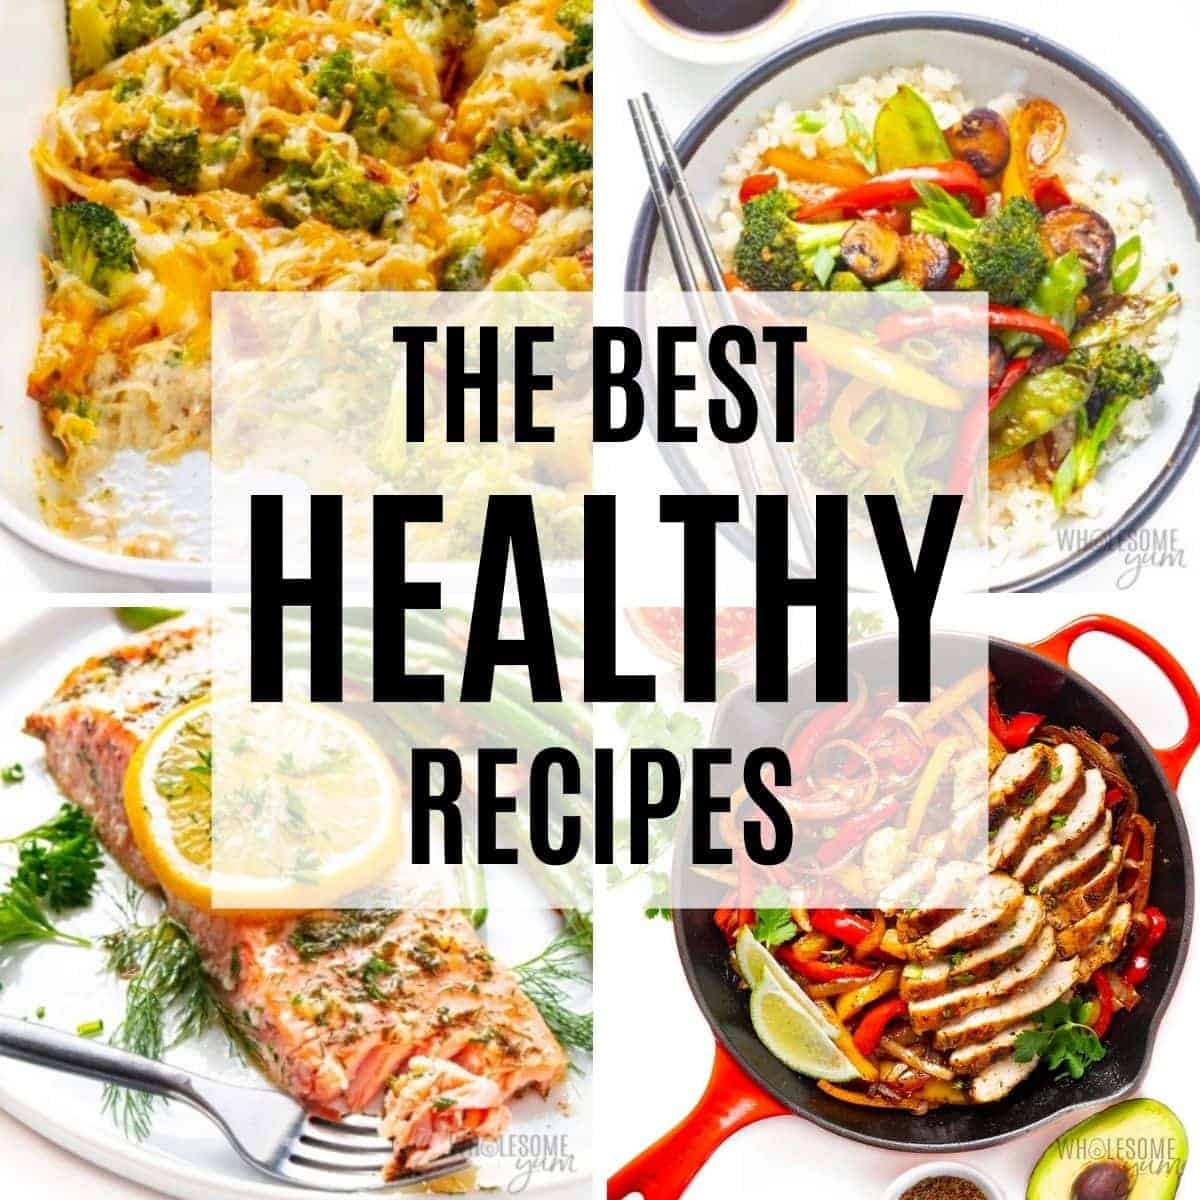 The Best Diet Foods to Eat for Health: Recipes